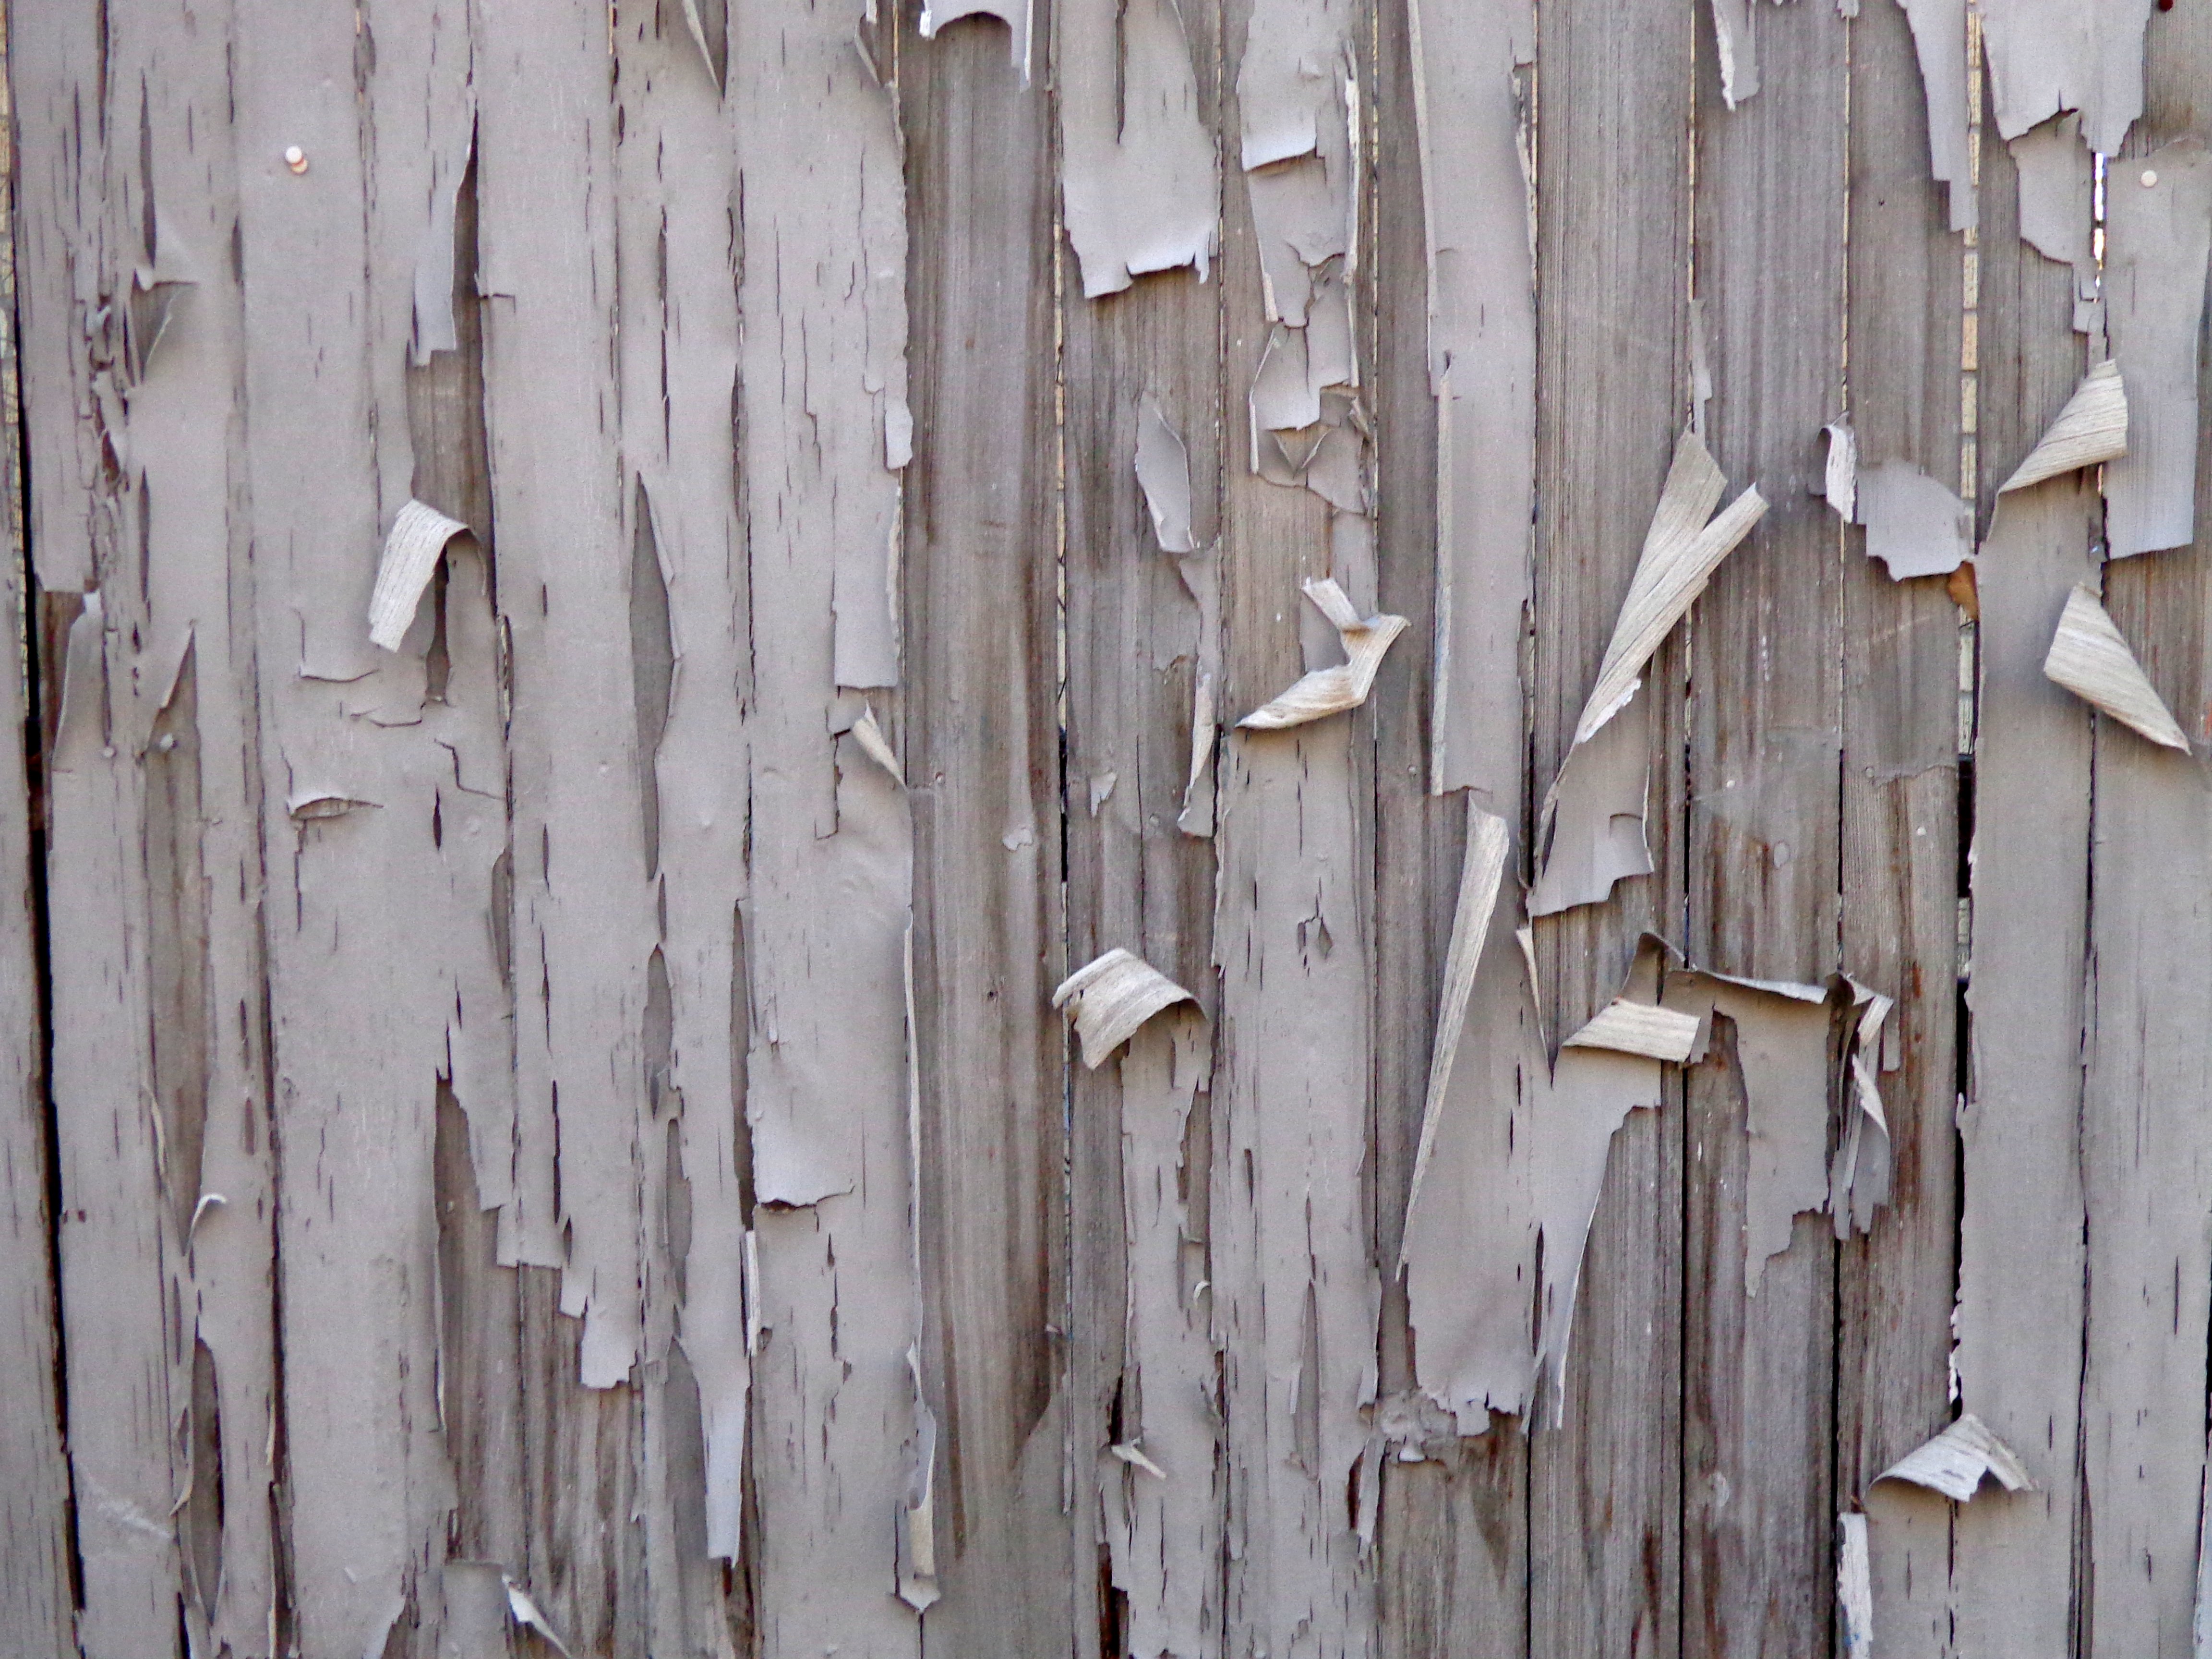 Peeling Paint on Fence Boards Texture Picture | Free Photograph ...